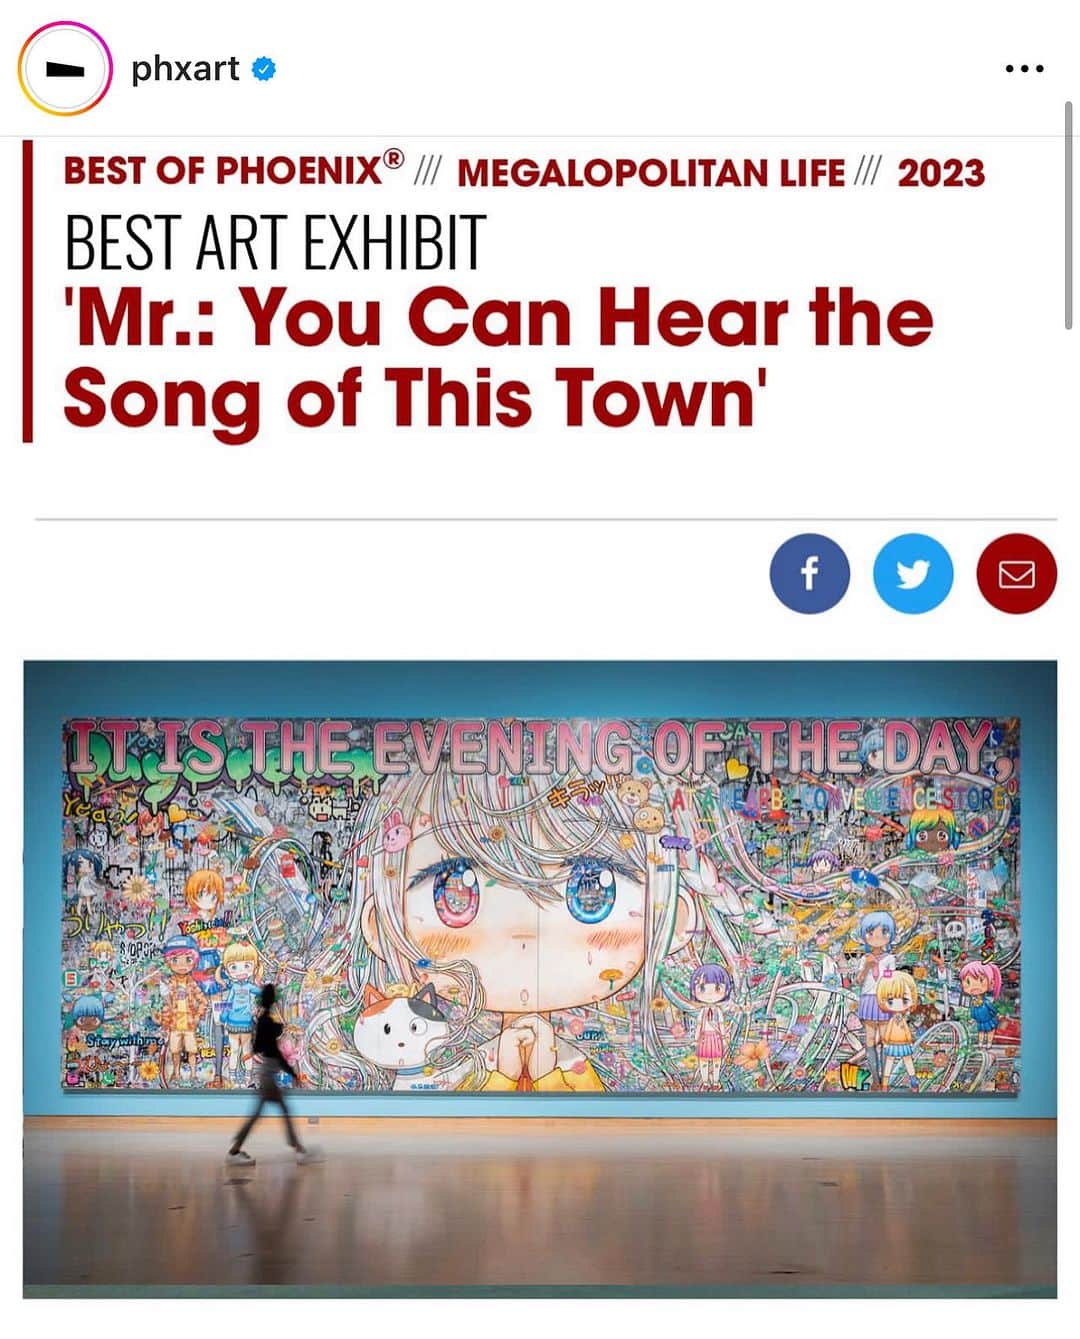 Mr.のインスタグラム：「Thank you so much! 😭😆🙏🙇🏻@phxart   So excited for Mr.: You Can Hear the Song of This Town to be named as best art exhibition in 2023 by @phoenixnewtimes 💫  Mr.: You Can Hear The Song of This Town was organized by Phoenix Art Museum, with special thanks to Lehmann Maupin and Kaikai Kiki. It was made possible through the generosity of a Major Sponsor (Anonymous), Partner Sponsors Ronald and Valery Harrar and Men’s Arts Council, Supporting Sponsor Ms. Isabelle Georgeaux, and Contributing Sponsor Kevie Yang, with additional support from The Japan Foundation–Los Angeles and Kimpton Hotel Palomar. It was curated by @gilbert_latinks ⚡️  #contemporaryart #bestof」